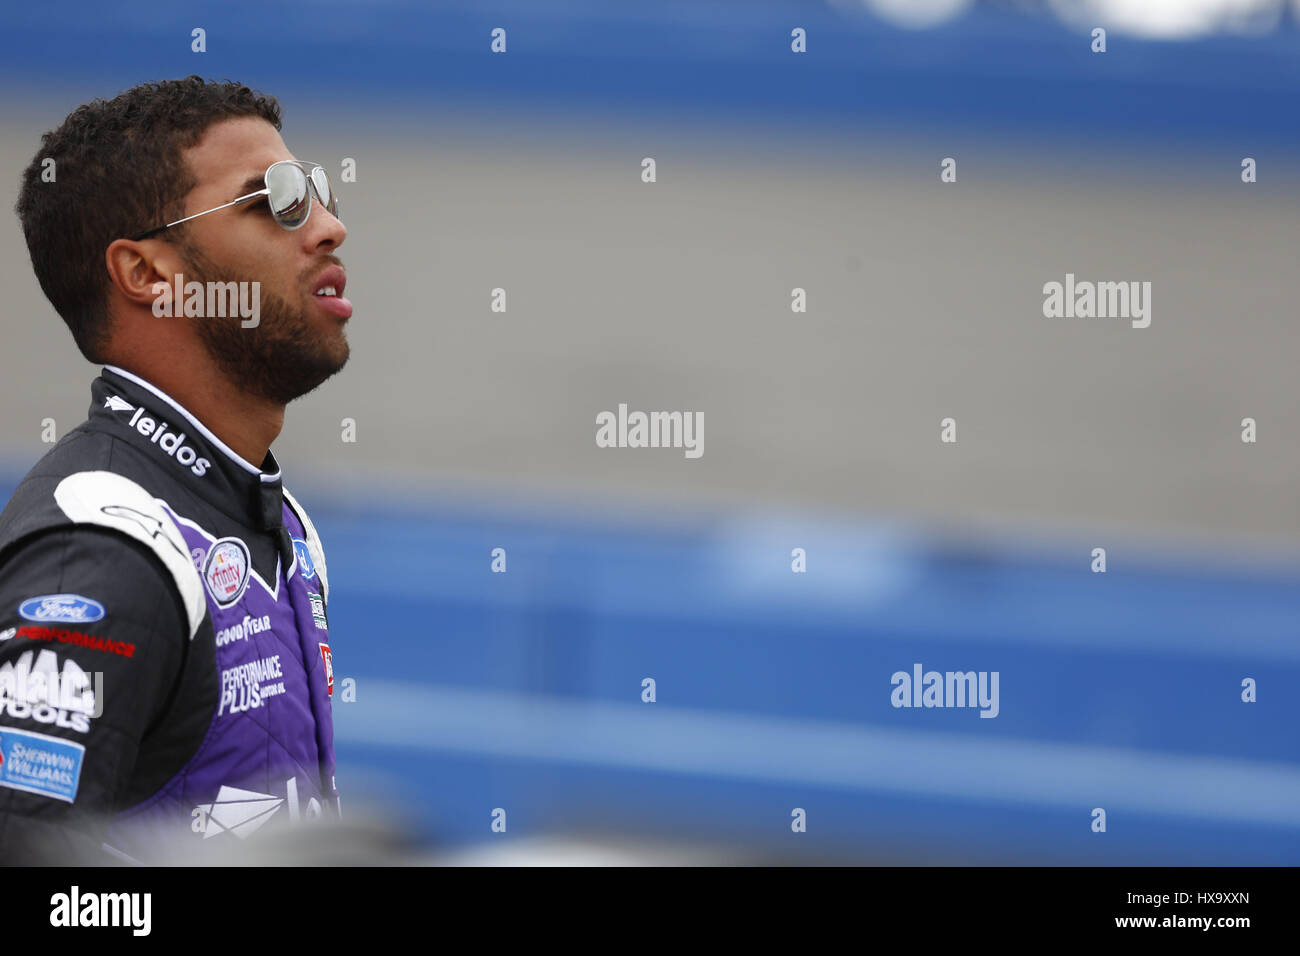 Fontana, California, USA. 25th Mar, 2017. March 25, 2017 - Fontana, California, USA: Darrell Wallace Jr (6) hangs out on pit road during qualifying for the NASCAR Xfinity Series NXS 300 at Auto Club Speedway in Fontana, California. Credit: Justin R. Noe Asp Inc/ASP/ZUMA Wire/Alamy Live News Stock Photo